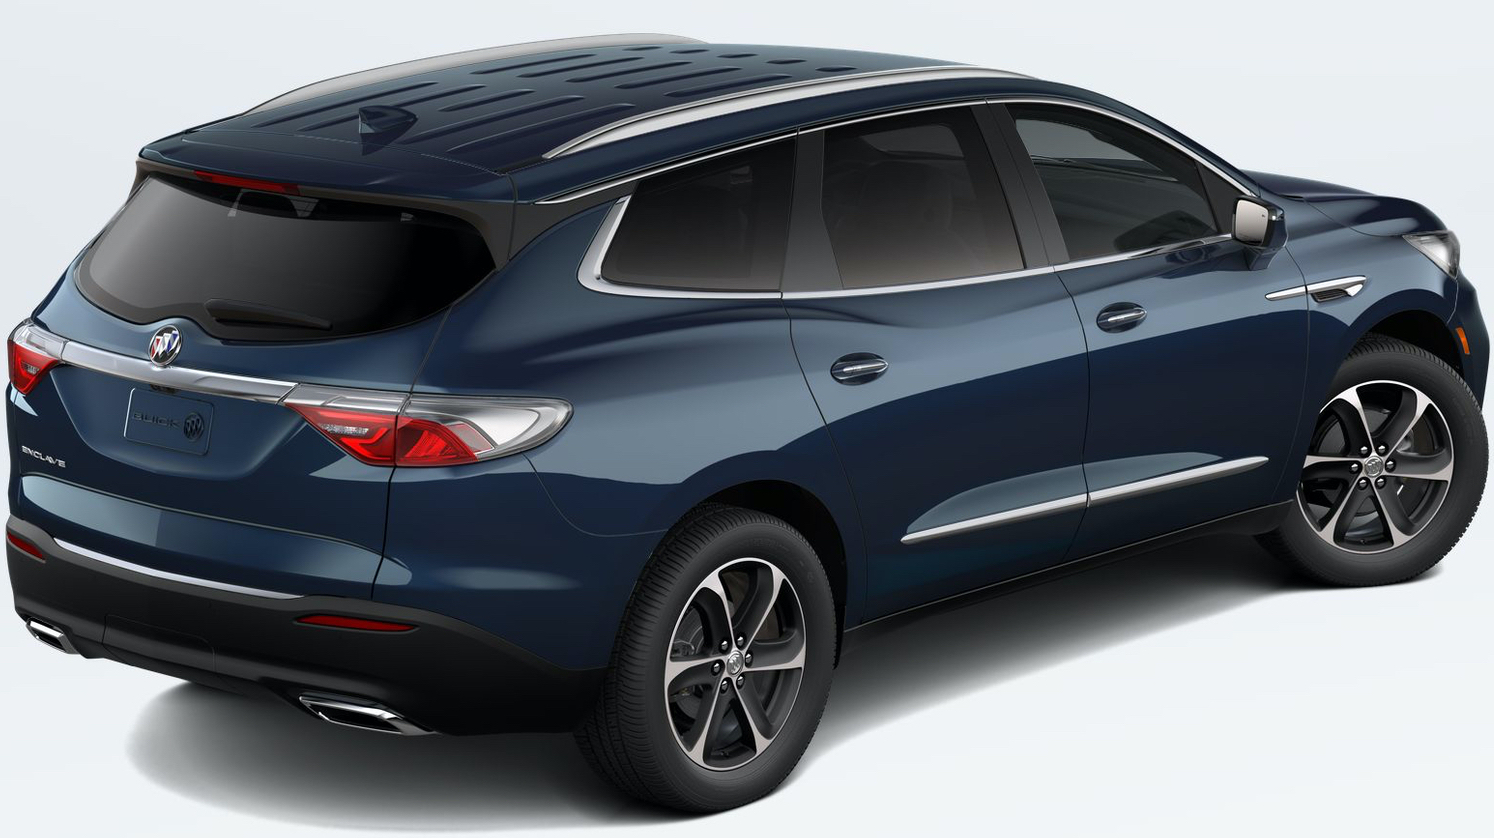 2022 Buick Enclave Gets New Emperor Blue Color: First Look